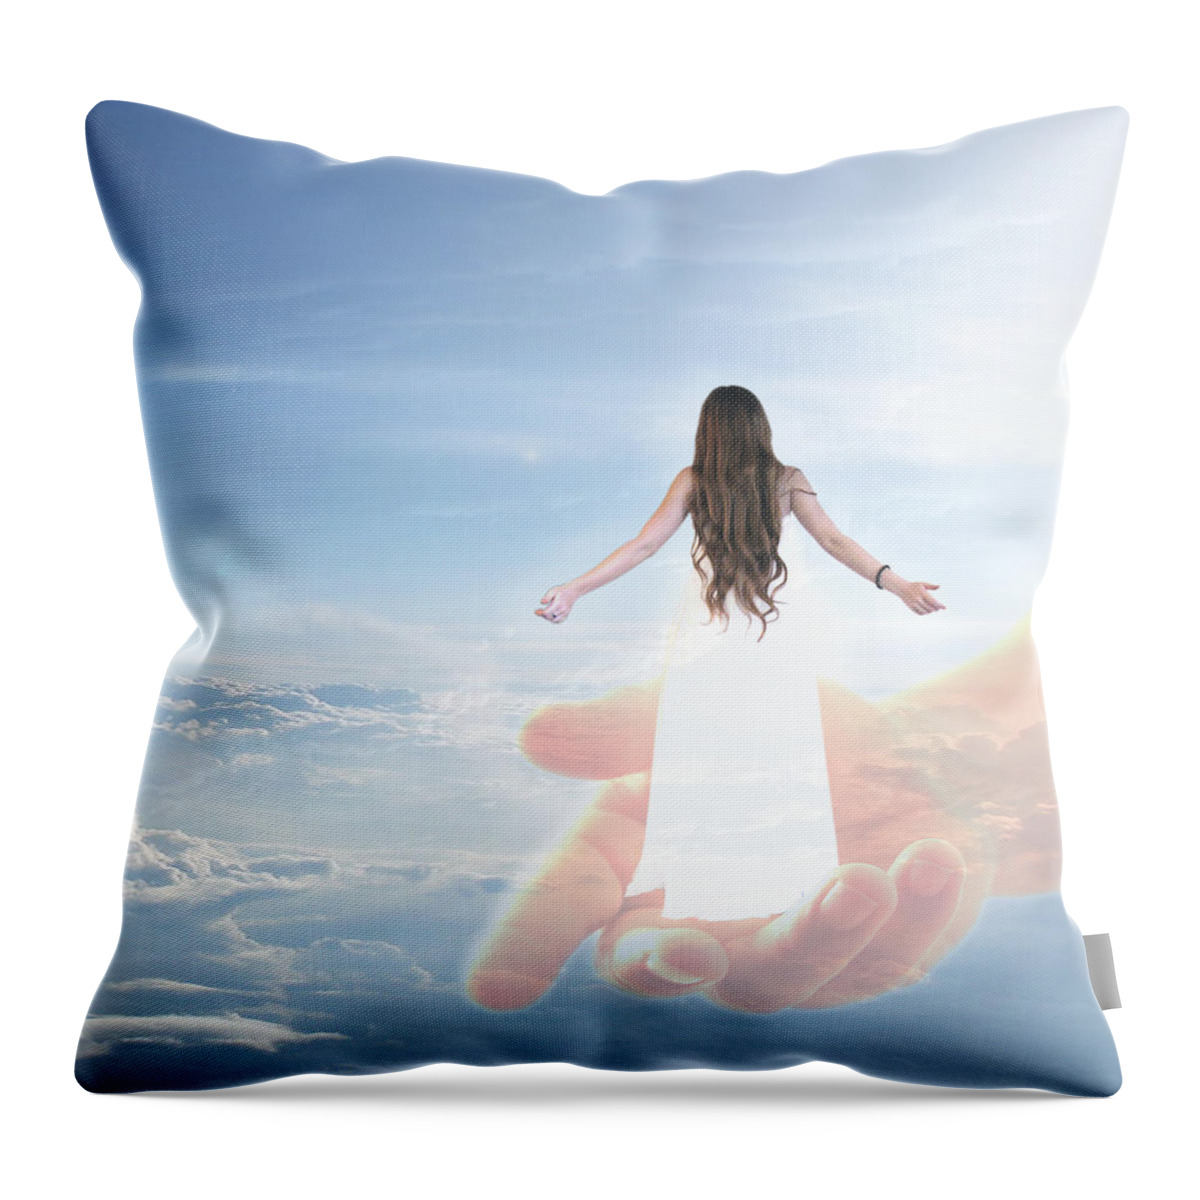 Manipulation Throw Pillow featuring the digital art Carried By God's Hand by Ester McGuire